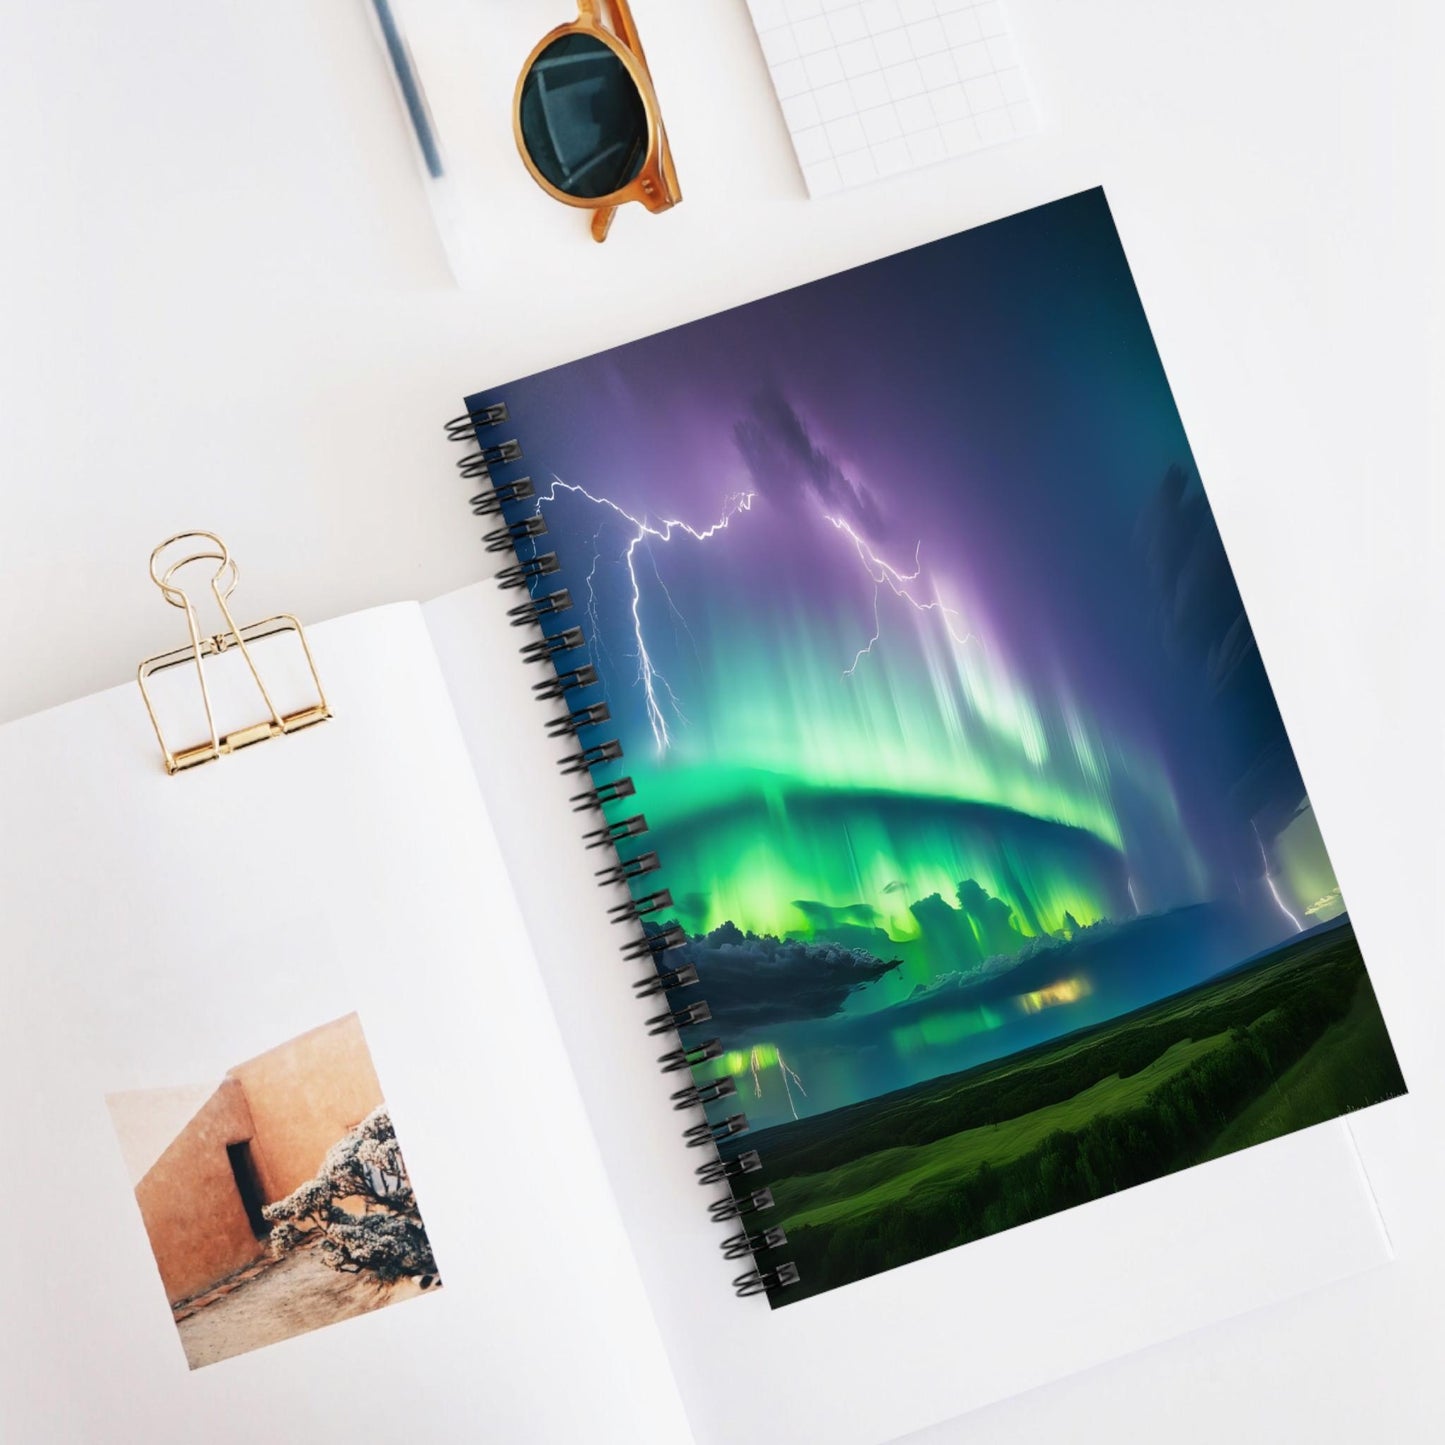 Unique Aurora Borealis Spiral Notebook Ruled Line - Personalized Northern Light View - Stationary Accessories - Perfect Aurora Lovers Gift 25